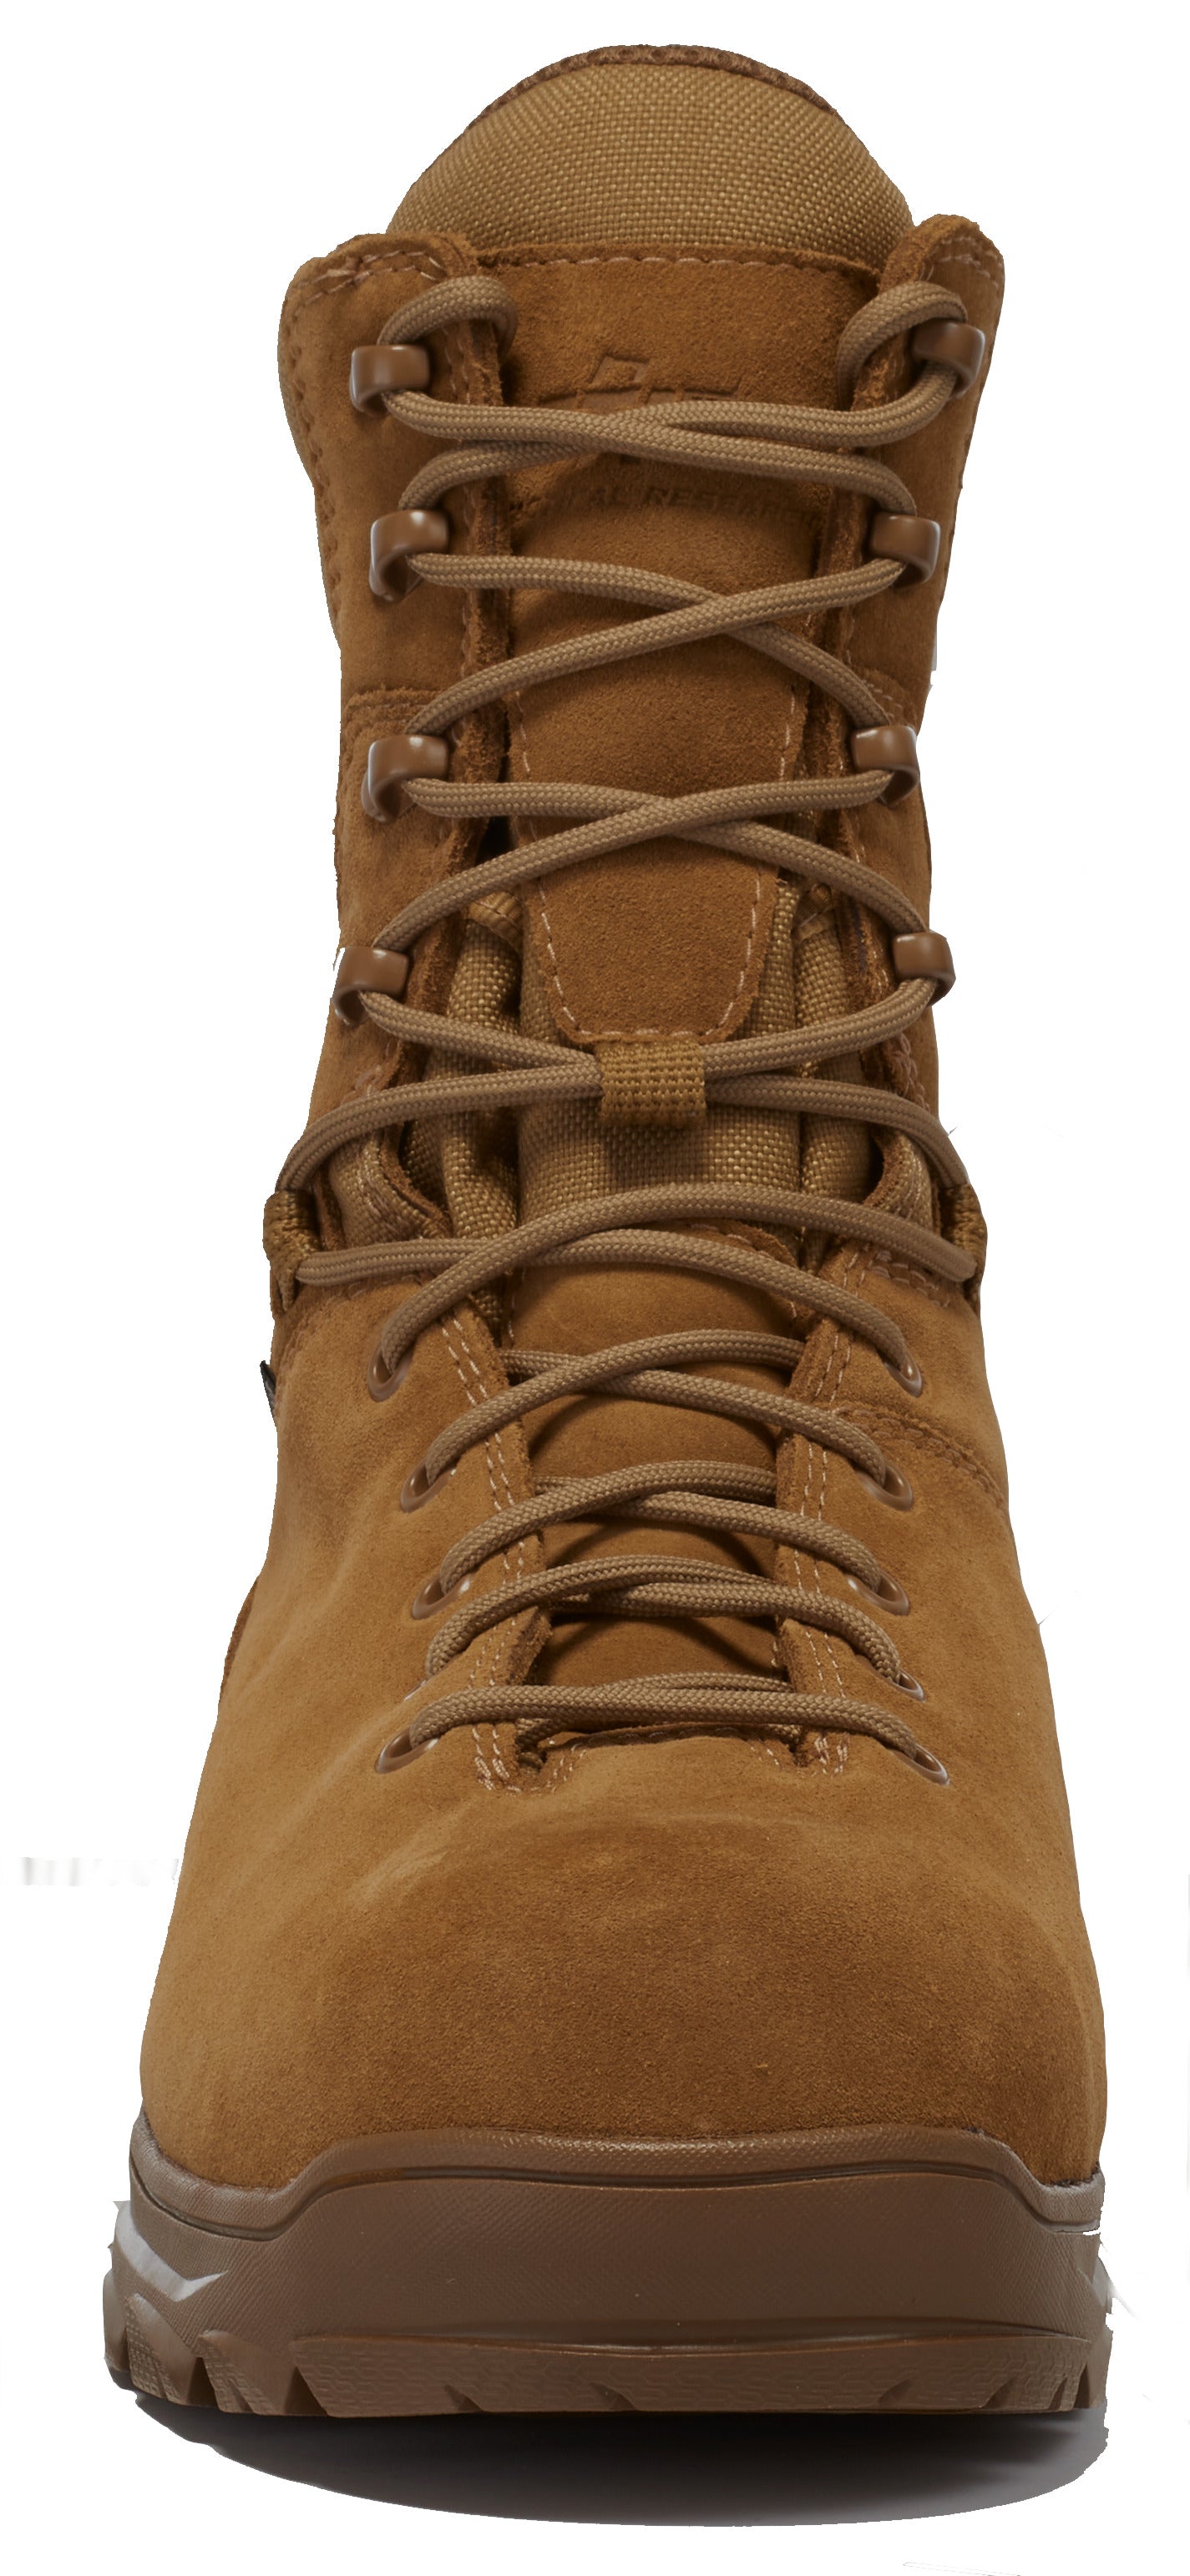 Belleville SQUALL Insulated Composite Toe Military Boots